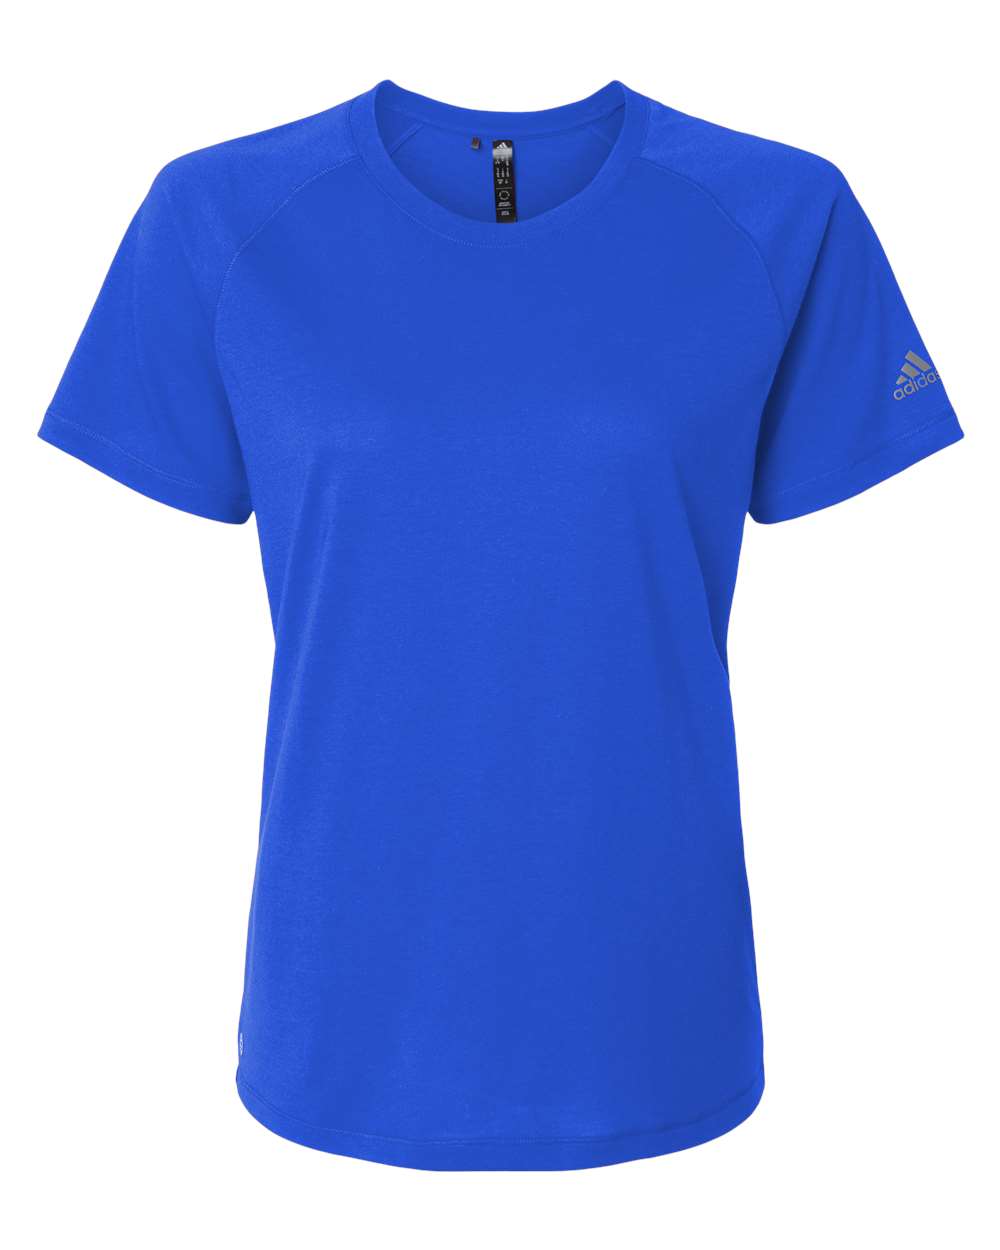 Adidas A557 Women's Blended T-Shirt #color_Collegiate Royal